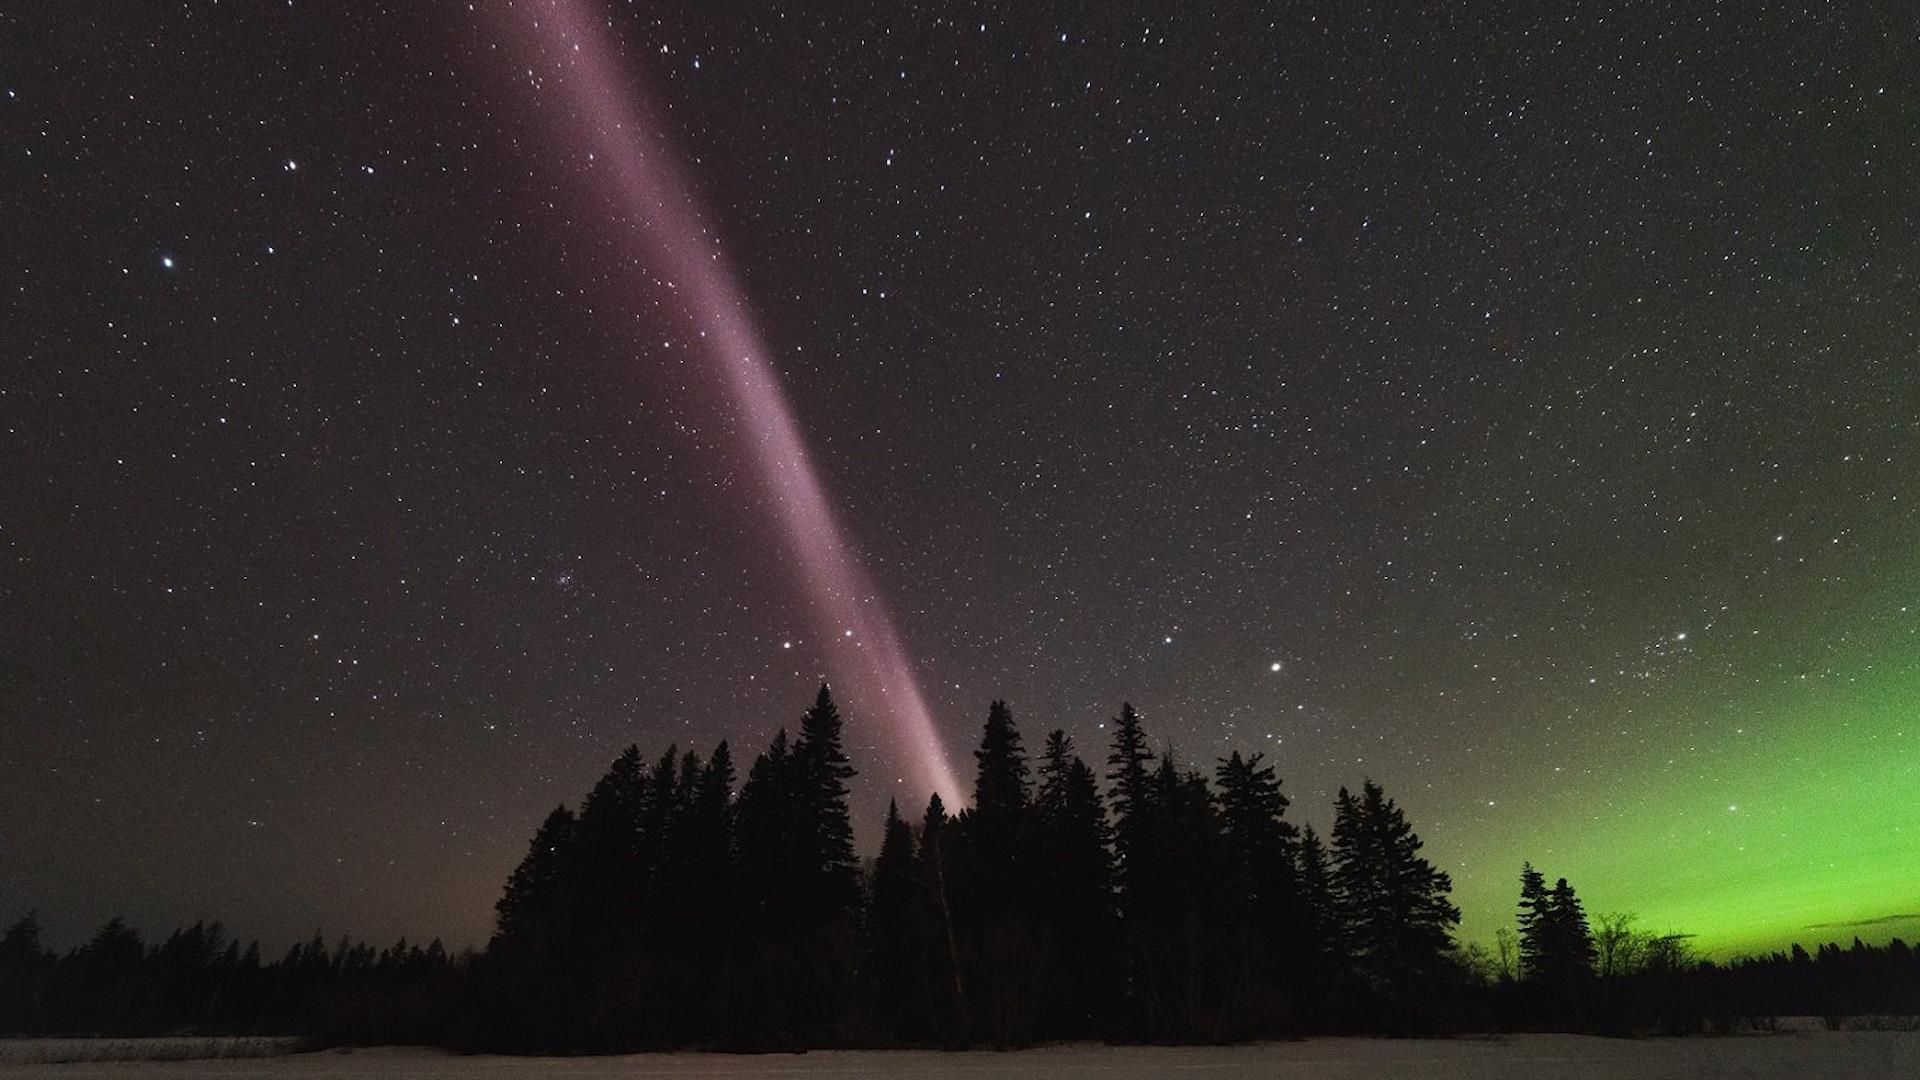 In this image, STEVE is a glowing pink streak across the dark starry purple sky. There are a row of black pine trees.